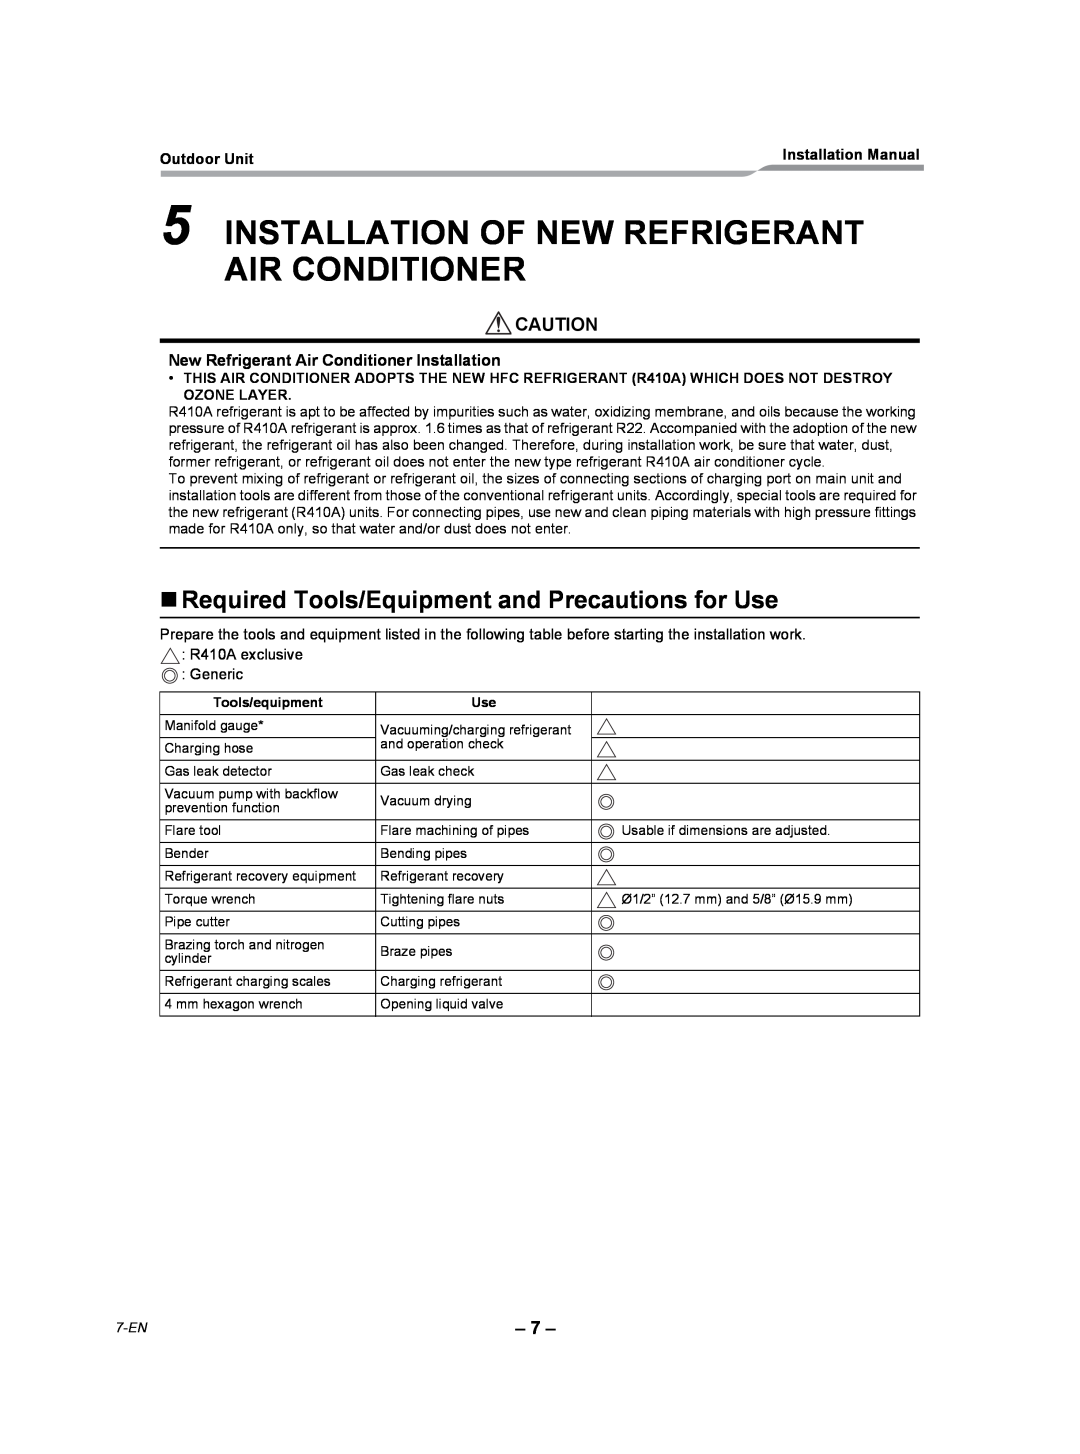 Toshiba RAV-SP240AT2-UL Installation Of New Refrigerant Air Conditioner, „Required Tools/Equipment and Precautions for Use 